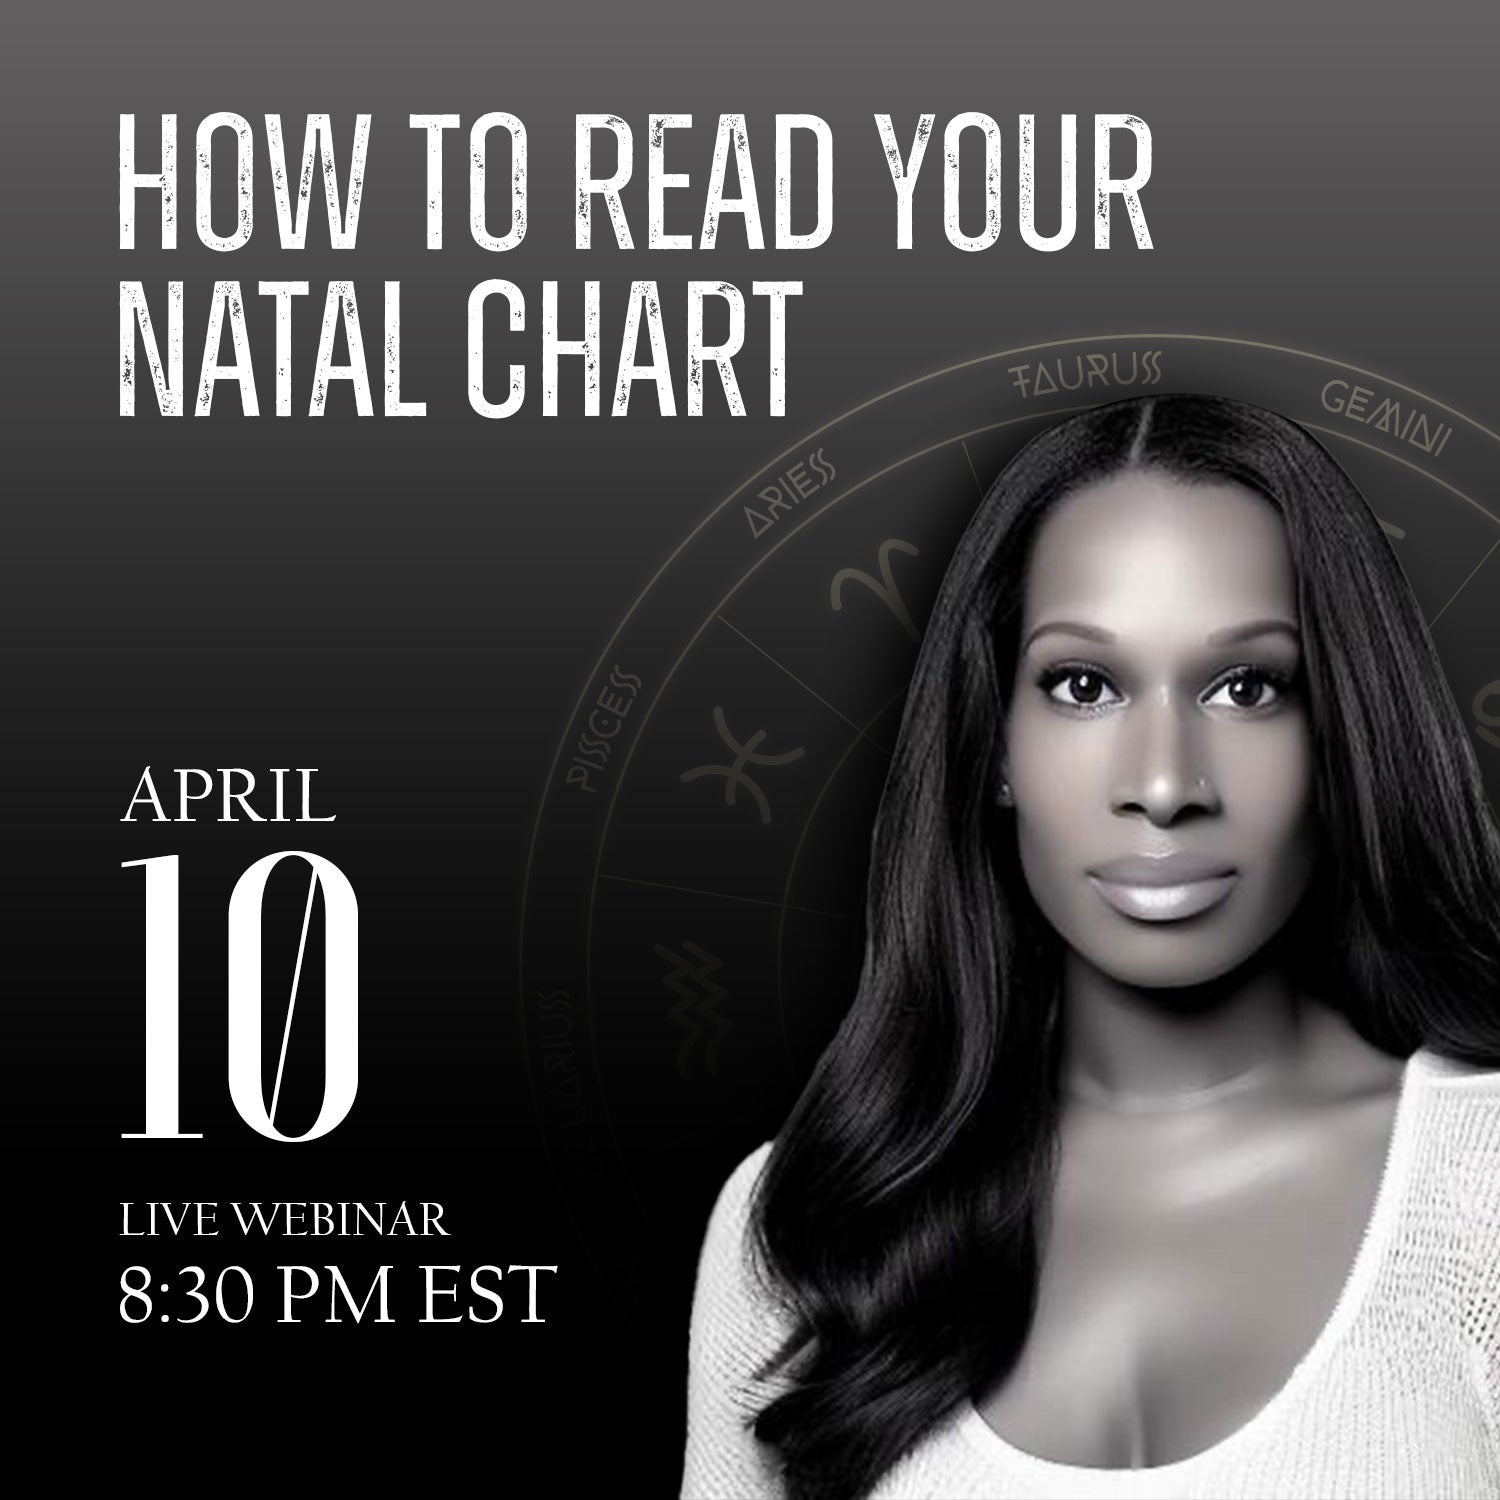 How to Read Your Natal Chart - Live Webinar